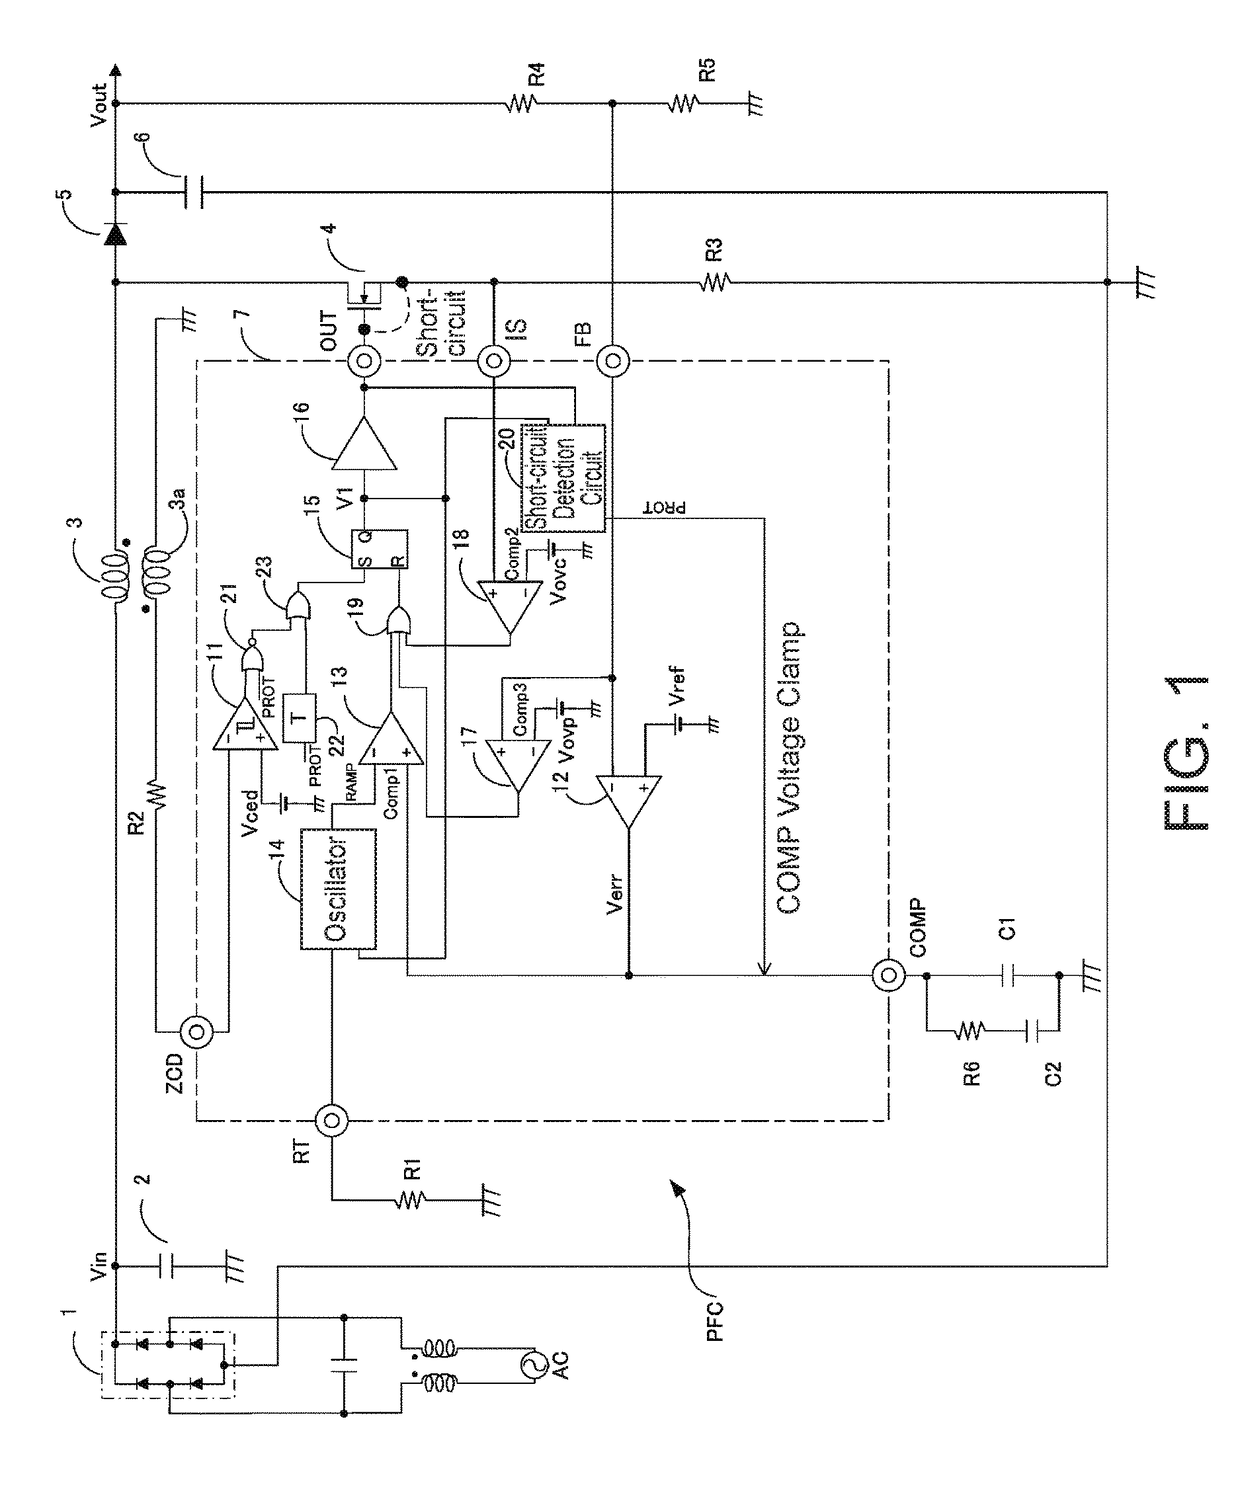 Switching power supply with short circuit detection